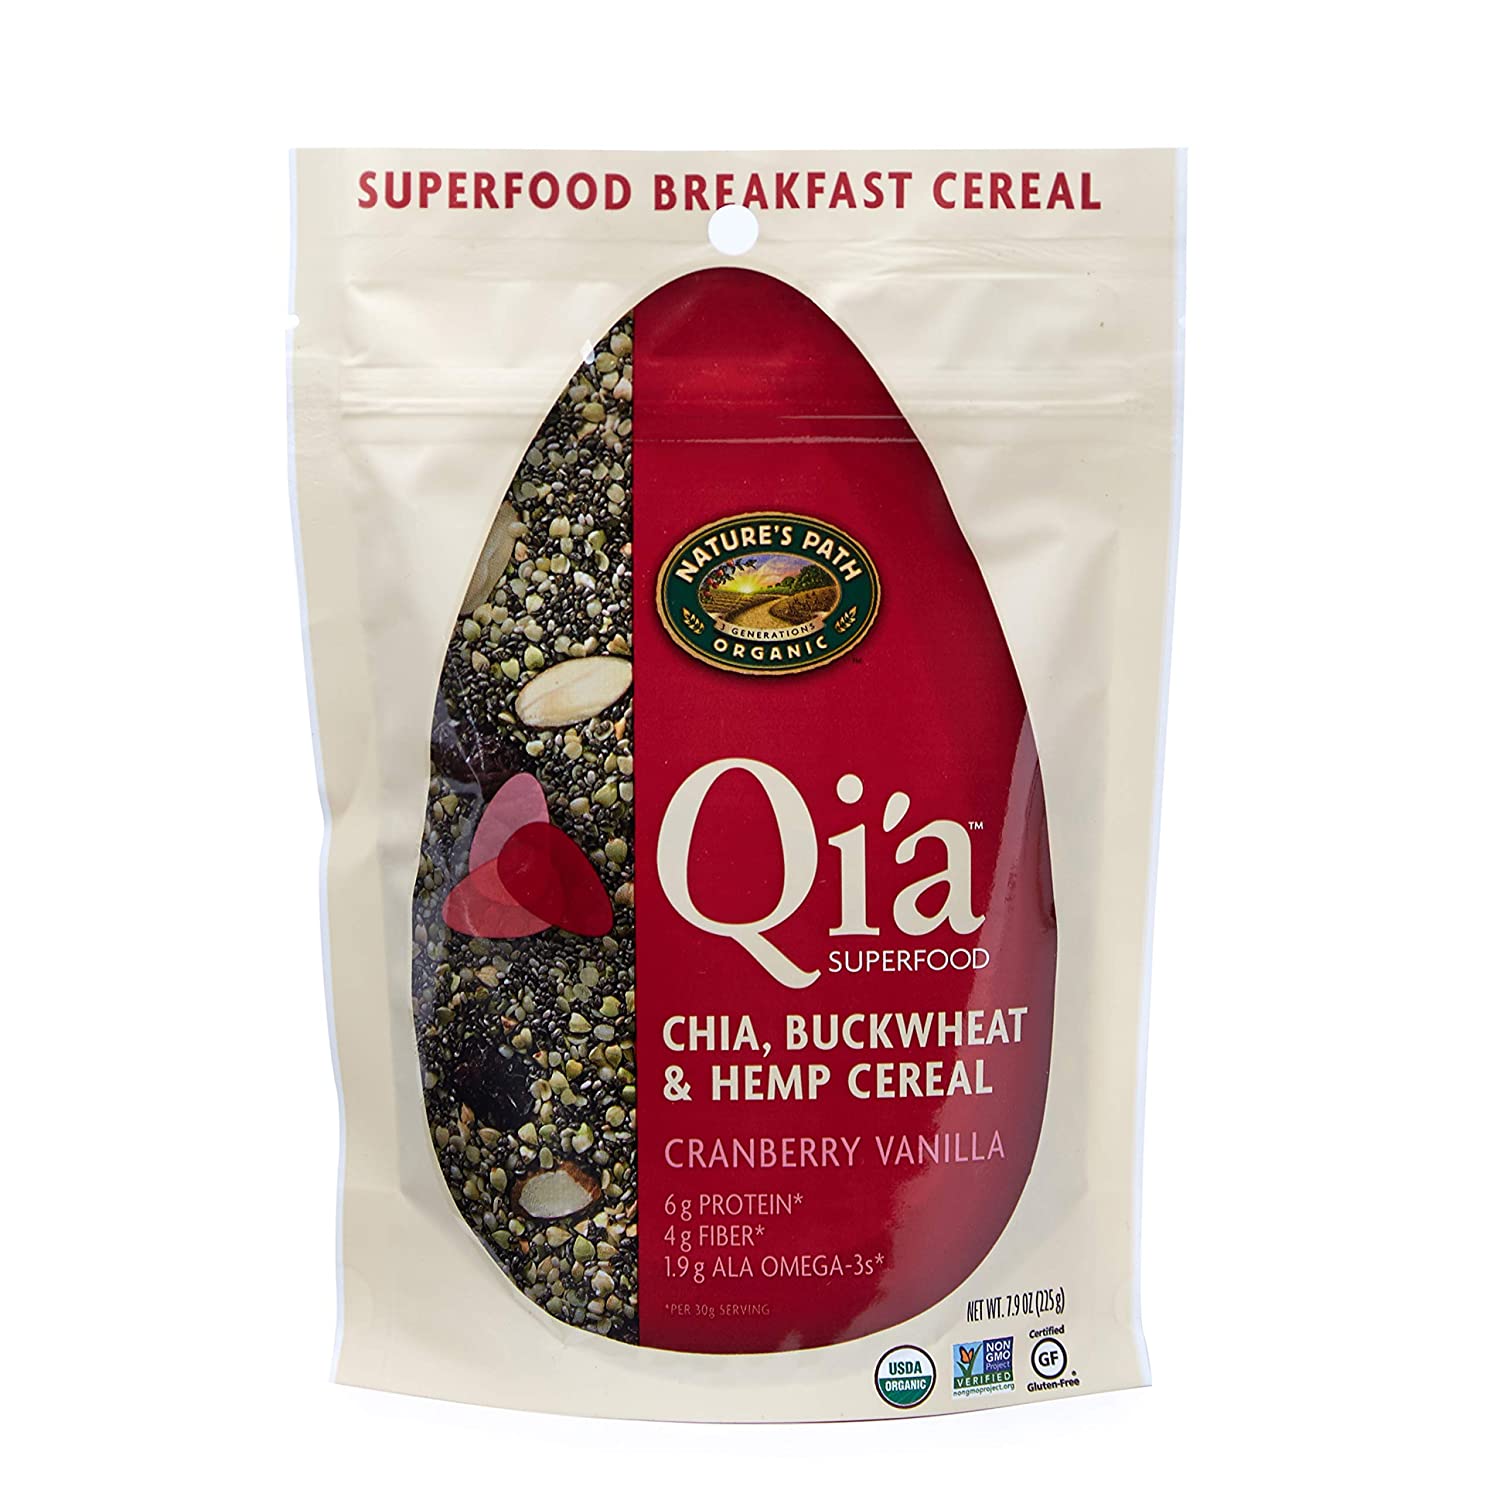 7.9-Oz Qi'a Superfood Organic Gluten-Free Chia, Buckwheat & Hemp Cereal Topper (Cranberry Vanilla or Original) $3.90 w/ S&S + Free Shipping w/ Prime or on $25+